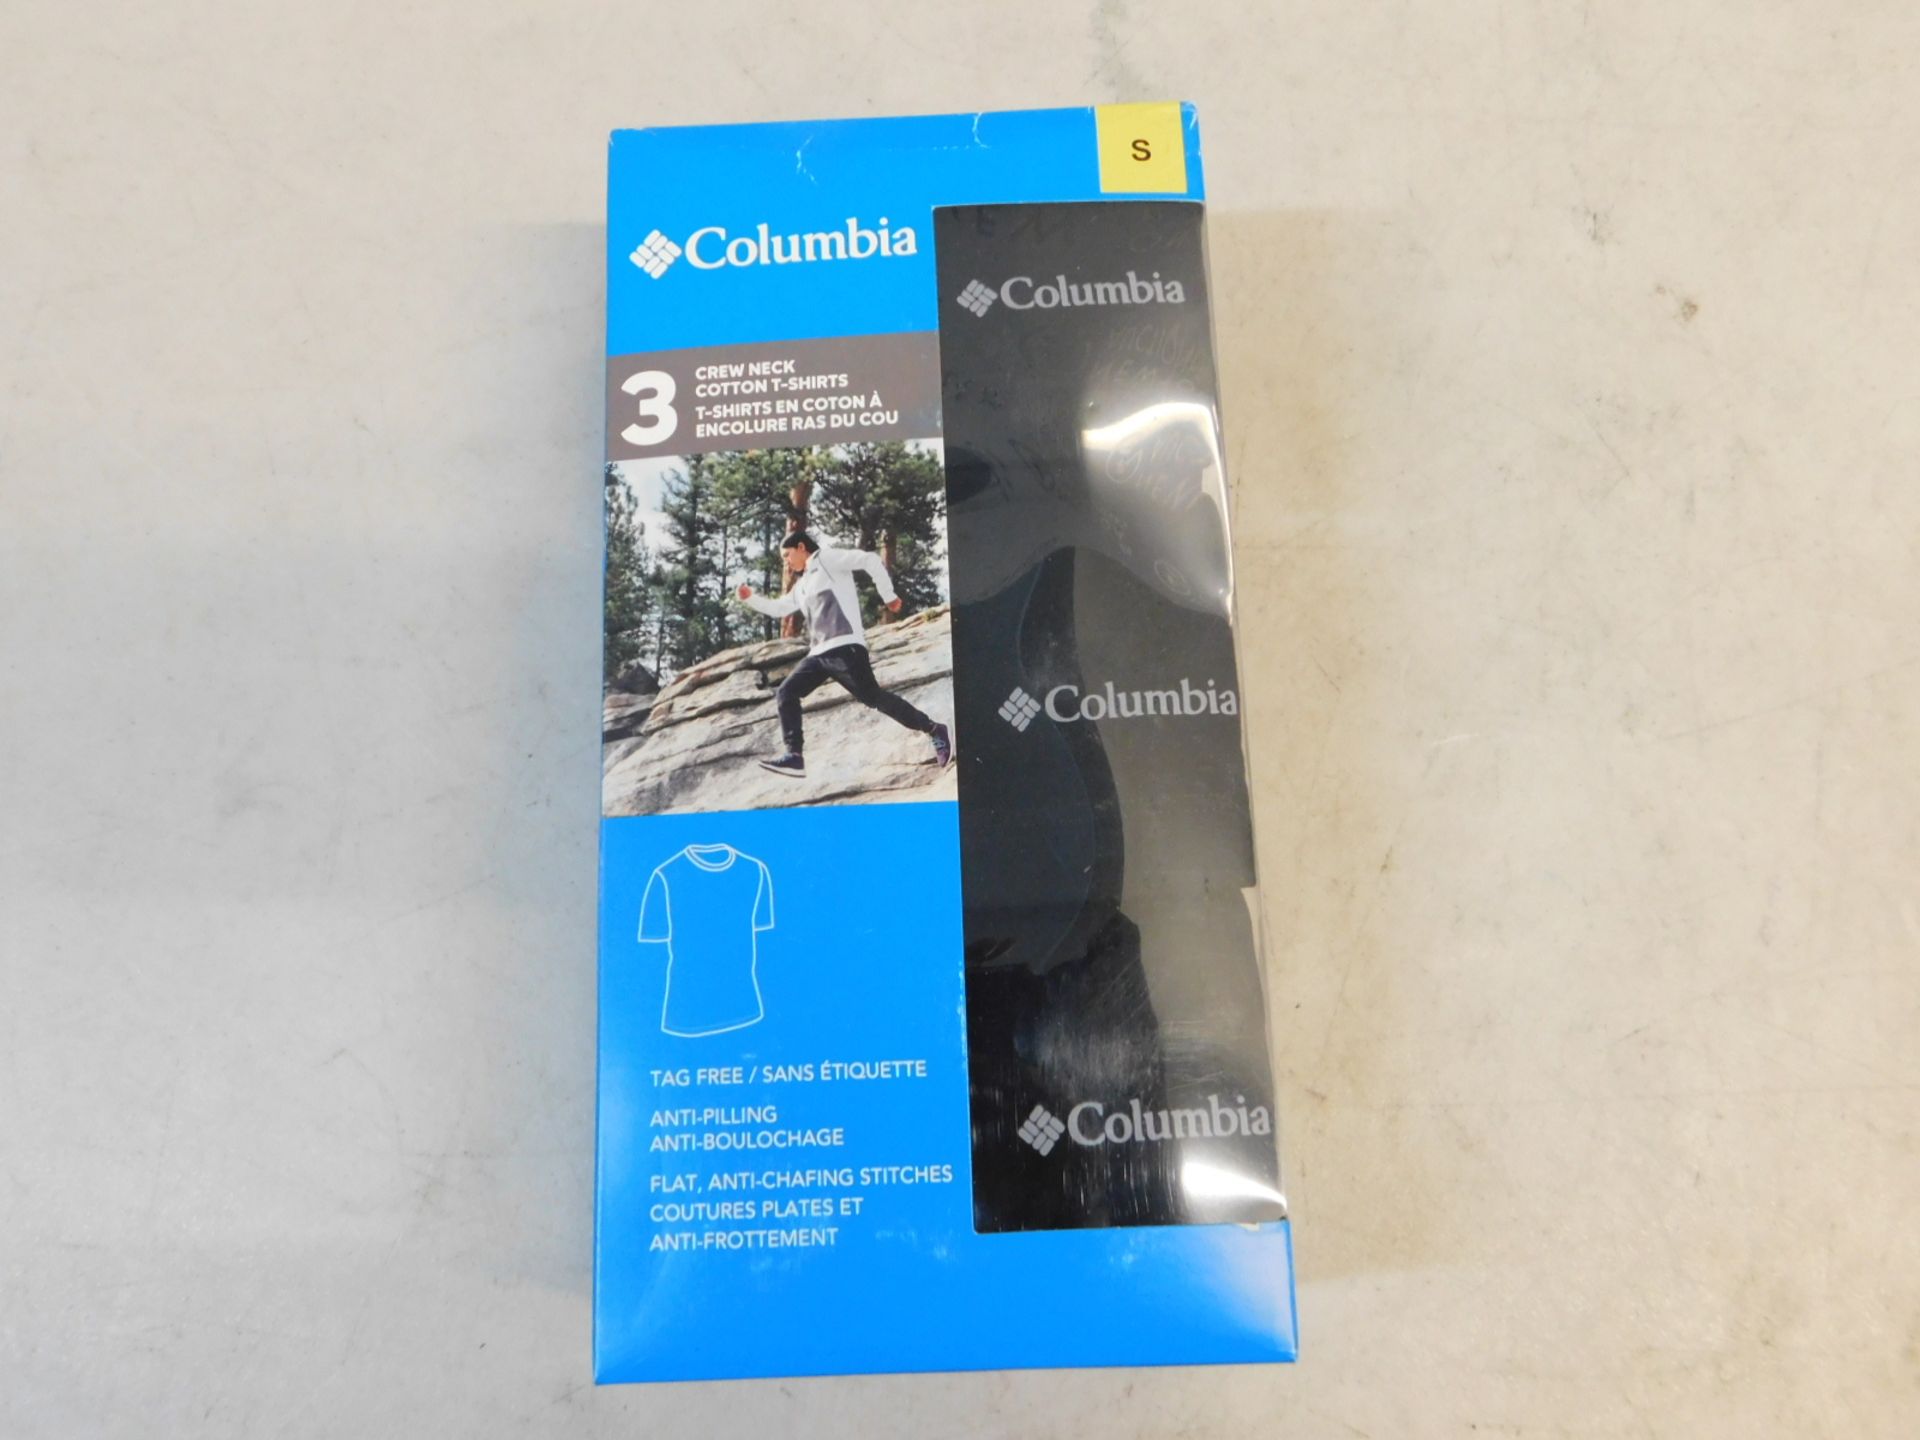 1 BRAND NEW BOXED COLUMBIA MEN'S 3-PACK SHORT SLEEVE CREW NECK COTTON T-SHIRTS IN BLACK SIZE S RRP